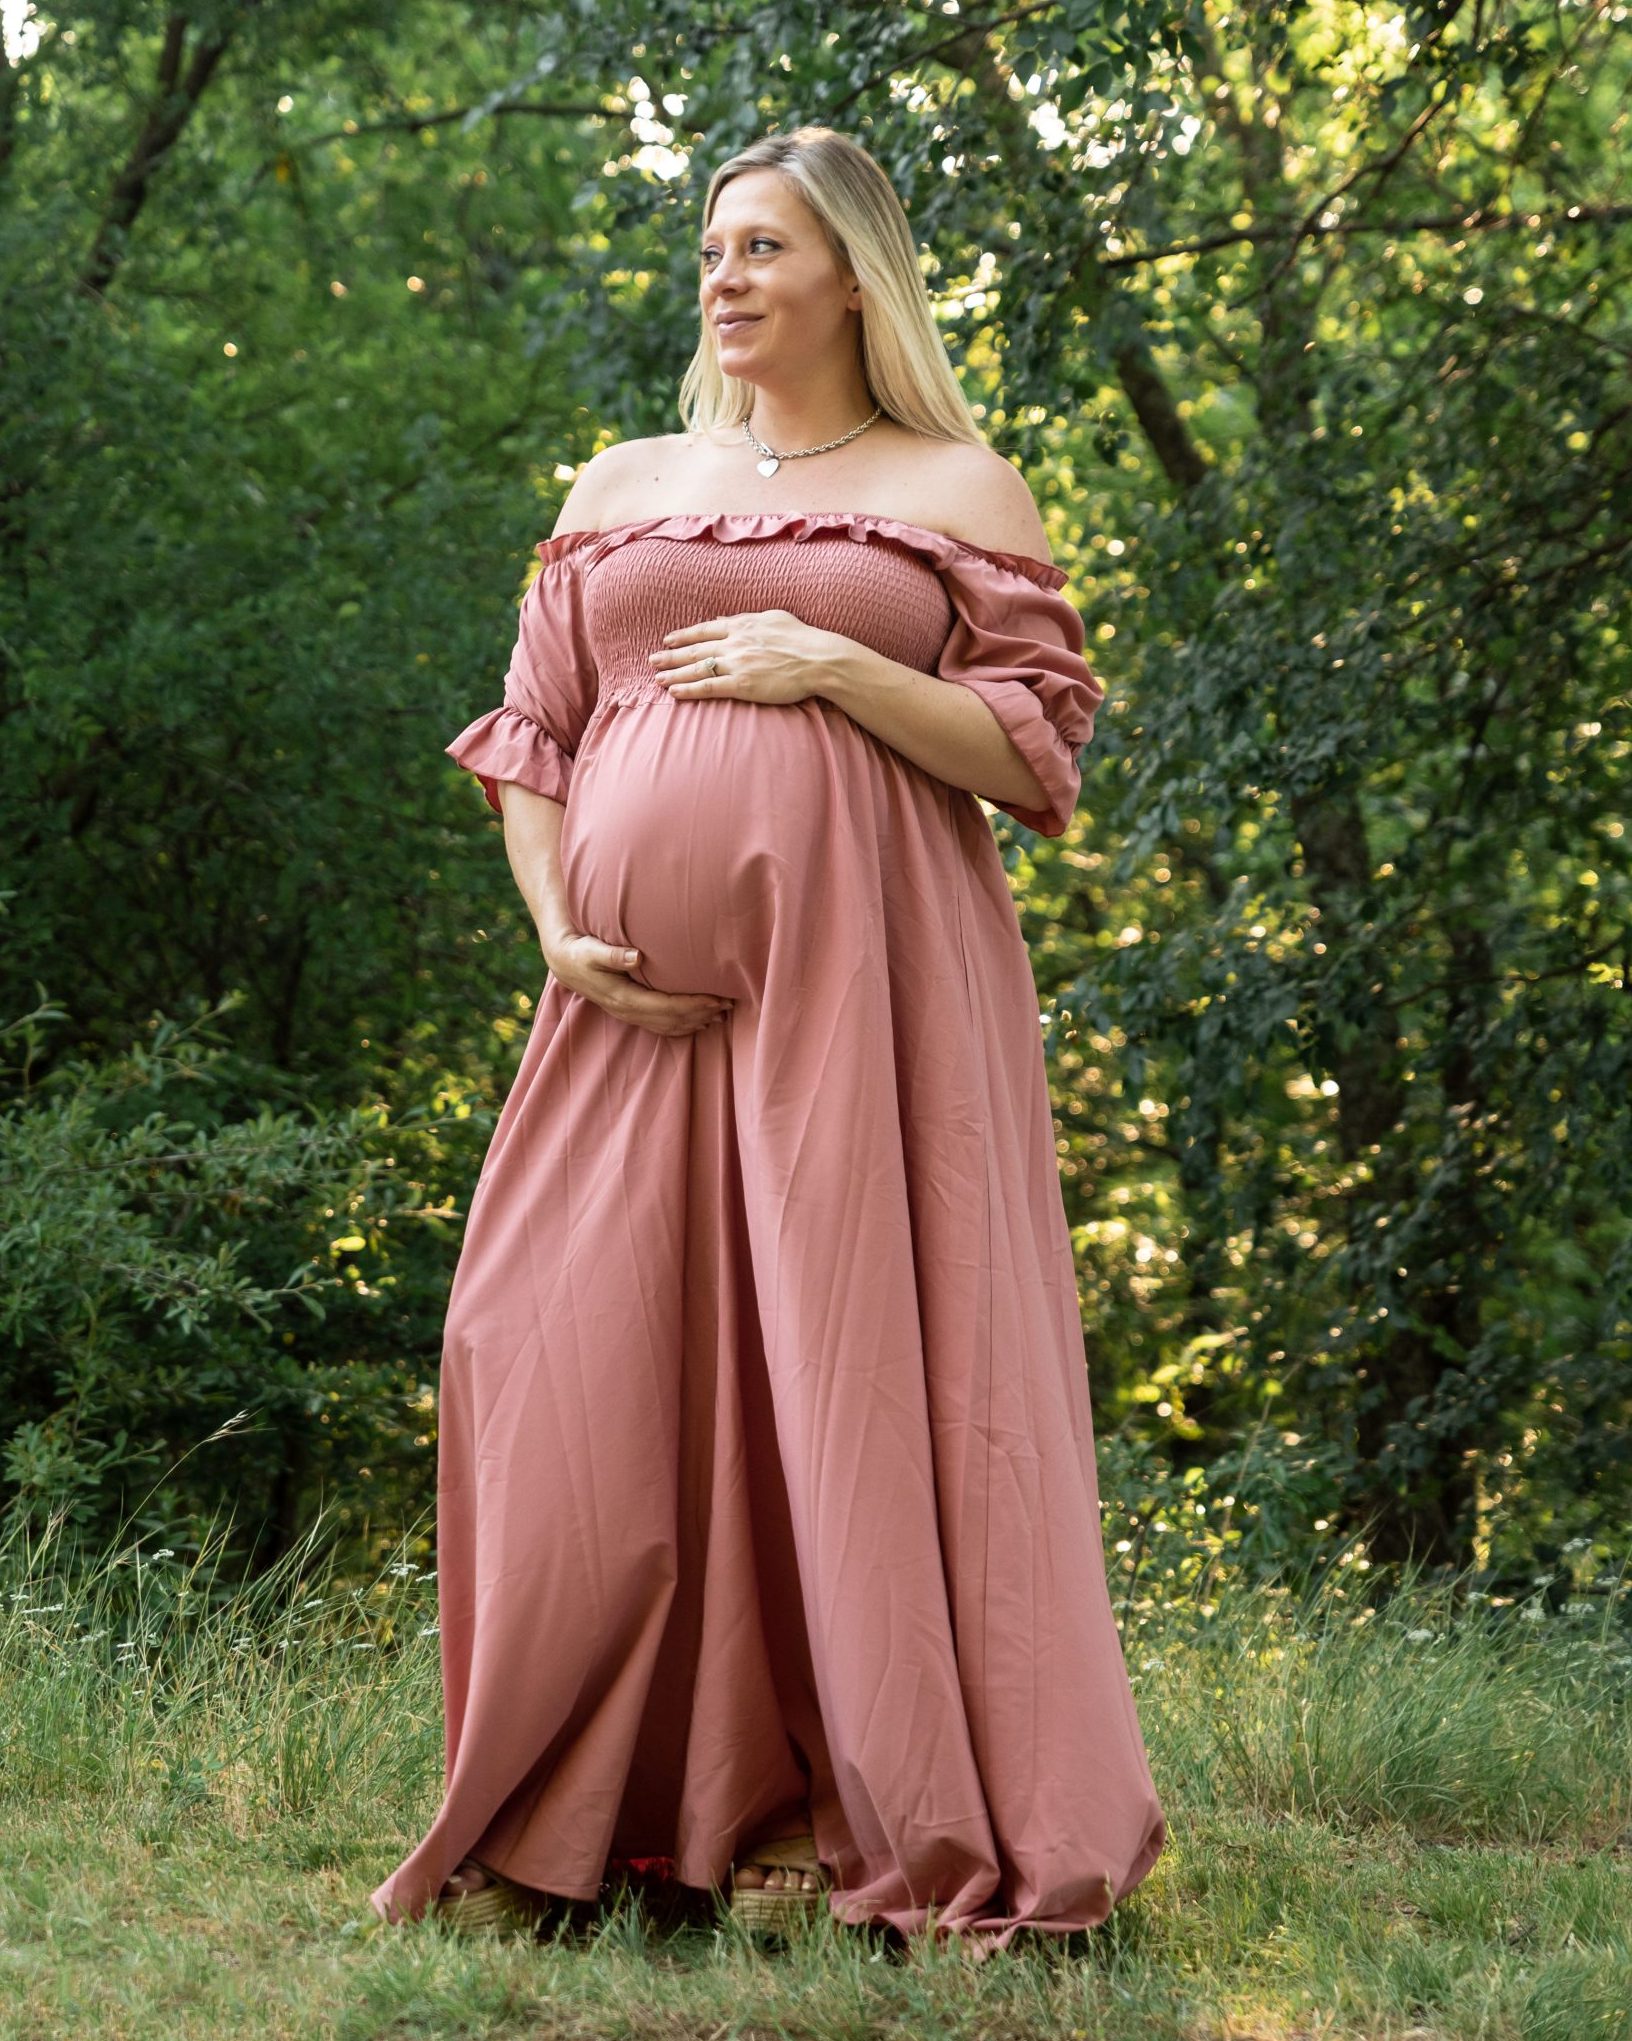 Maternity Photographer with Gowns